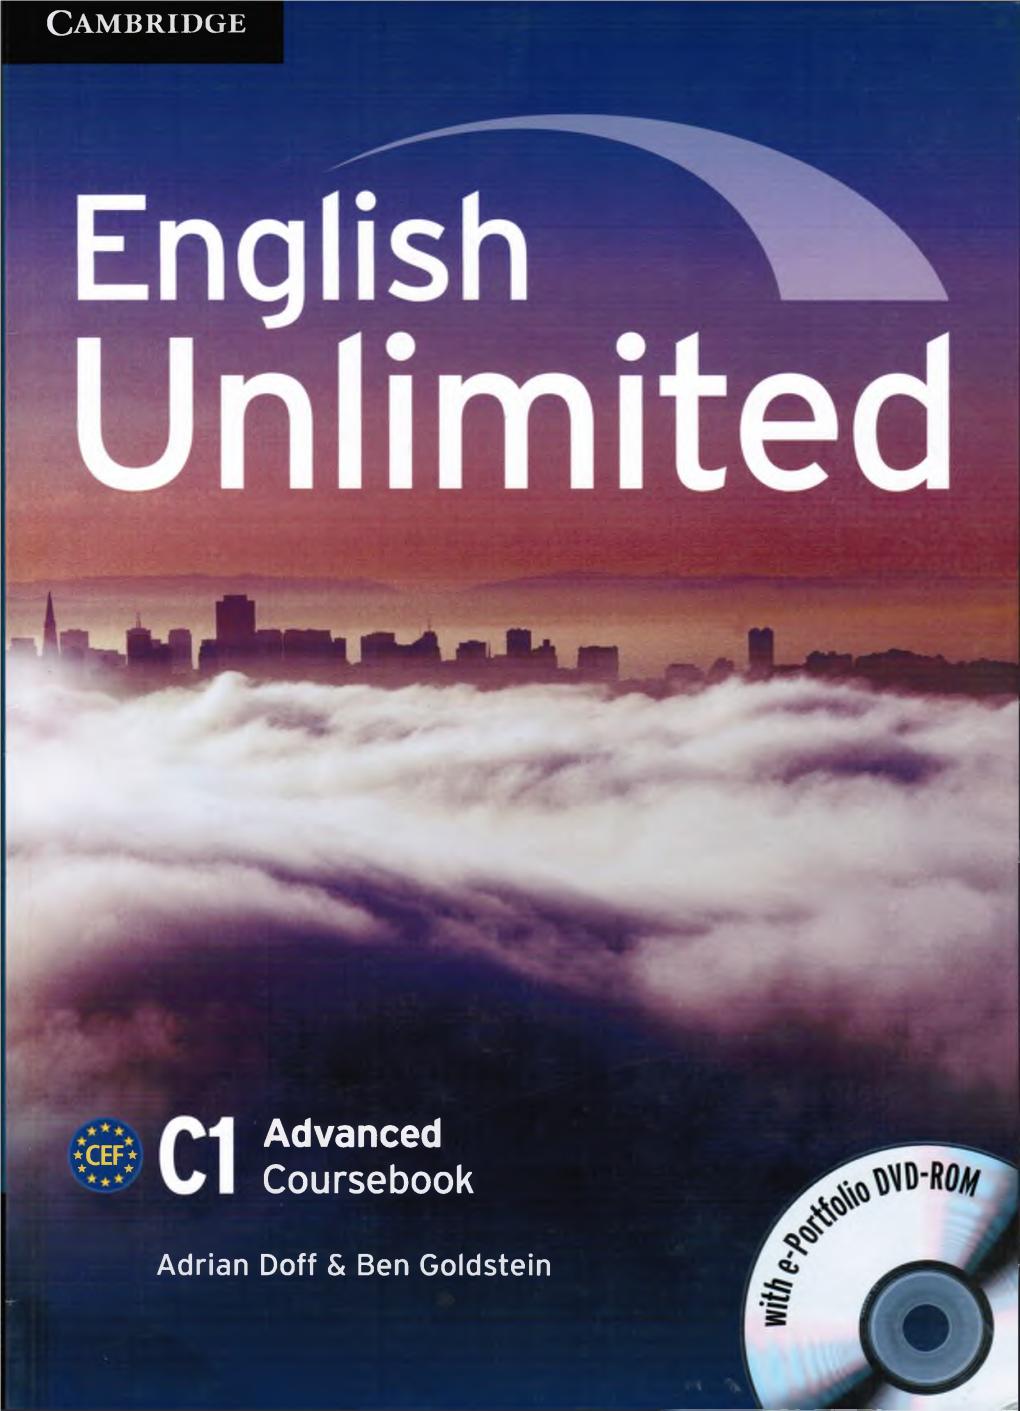 Advanced Coursebook with E-Portfolio DVD-ROM Unlimited for Windows and Mac Adrian Doff & Ben Goldstein